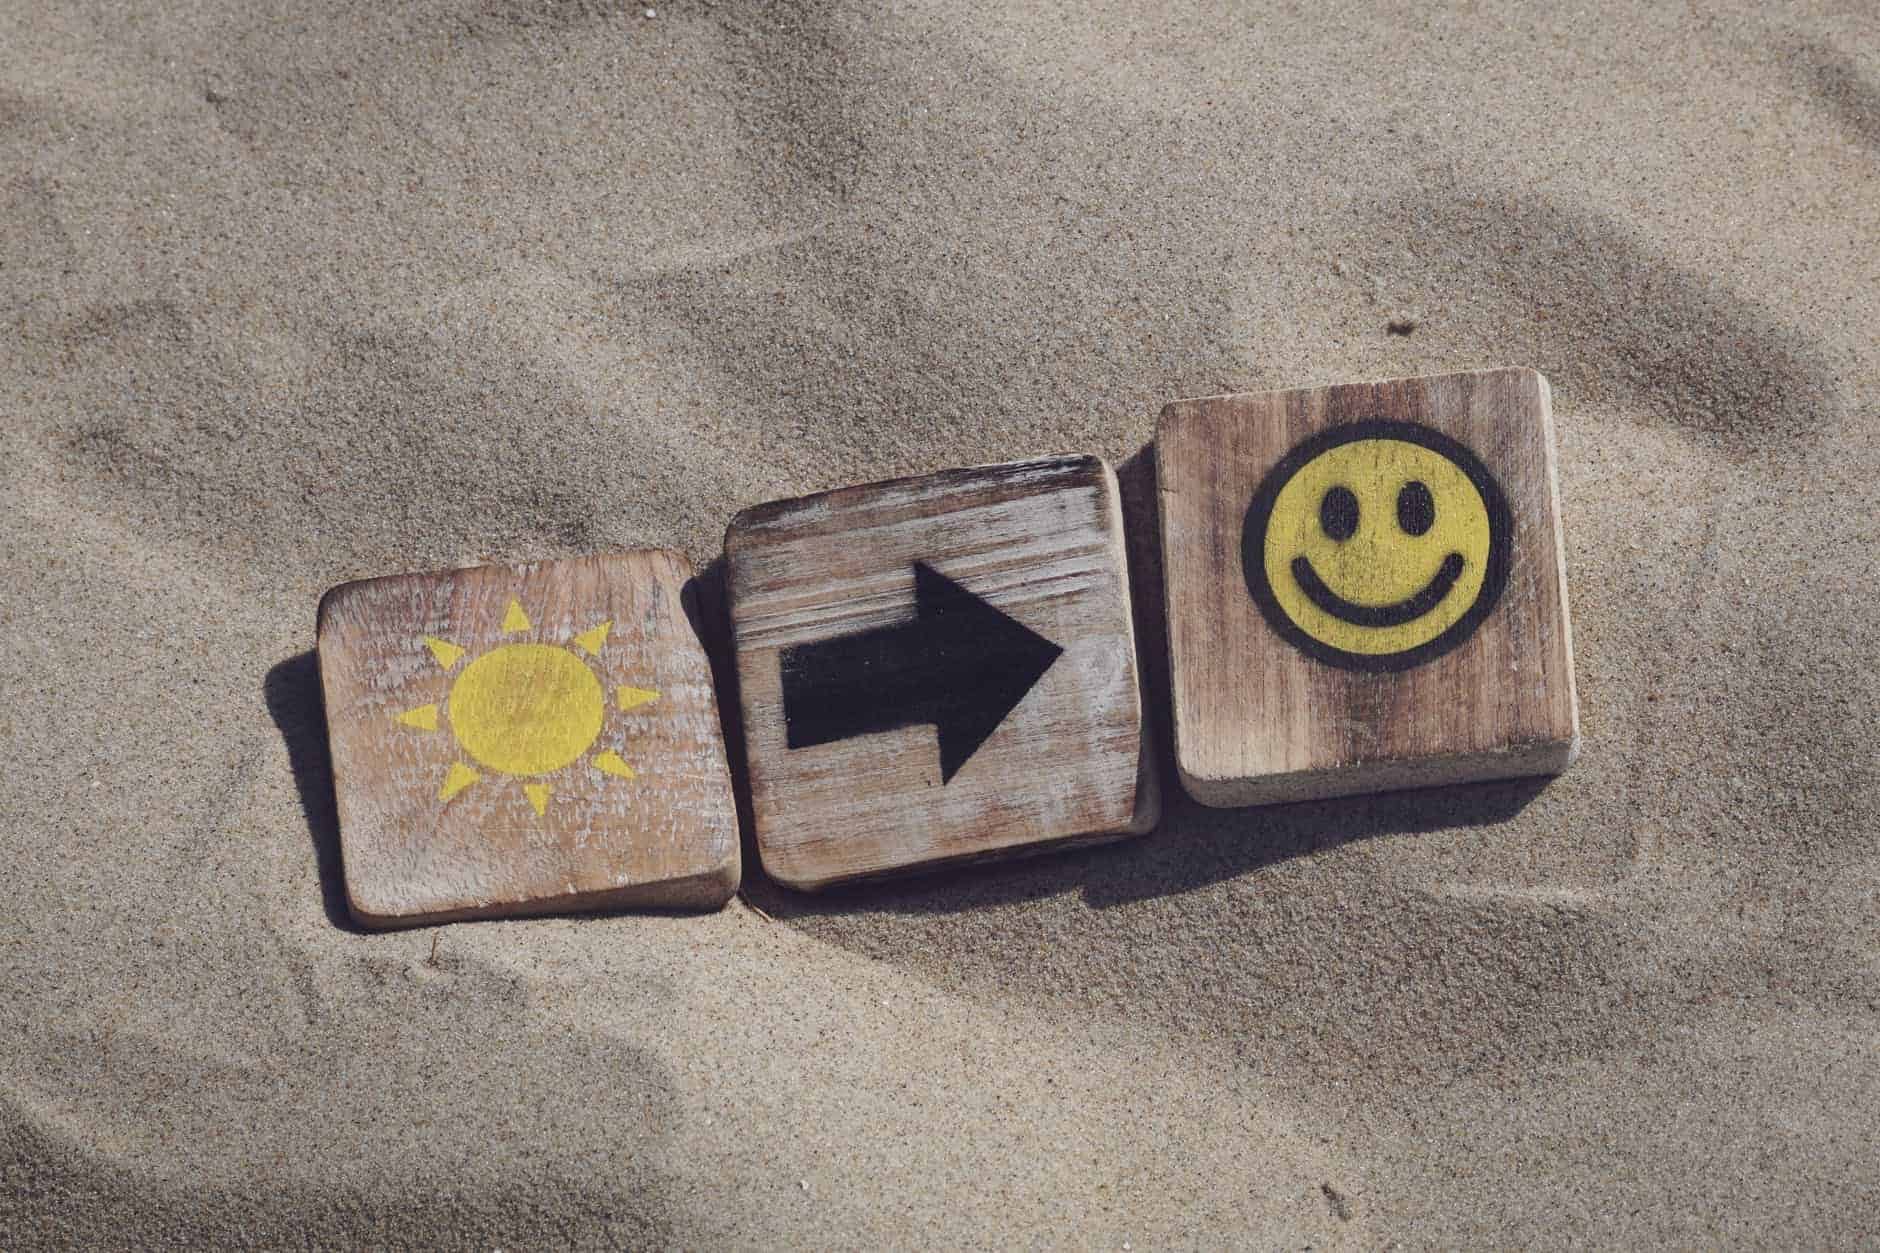 three square wooden block in the sand, the left block has a painted sun on it, the center block has a painted right arrow on it, the right block has a painted sun with a smiling face on it